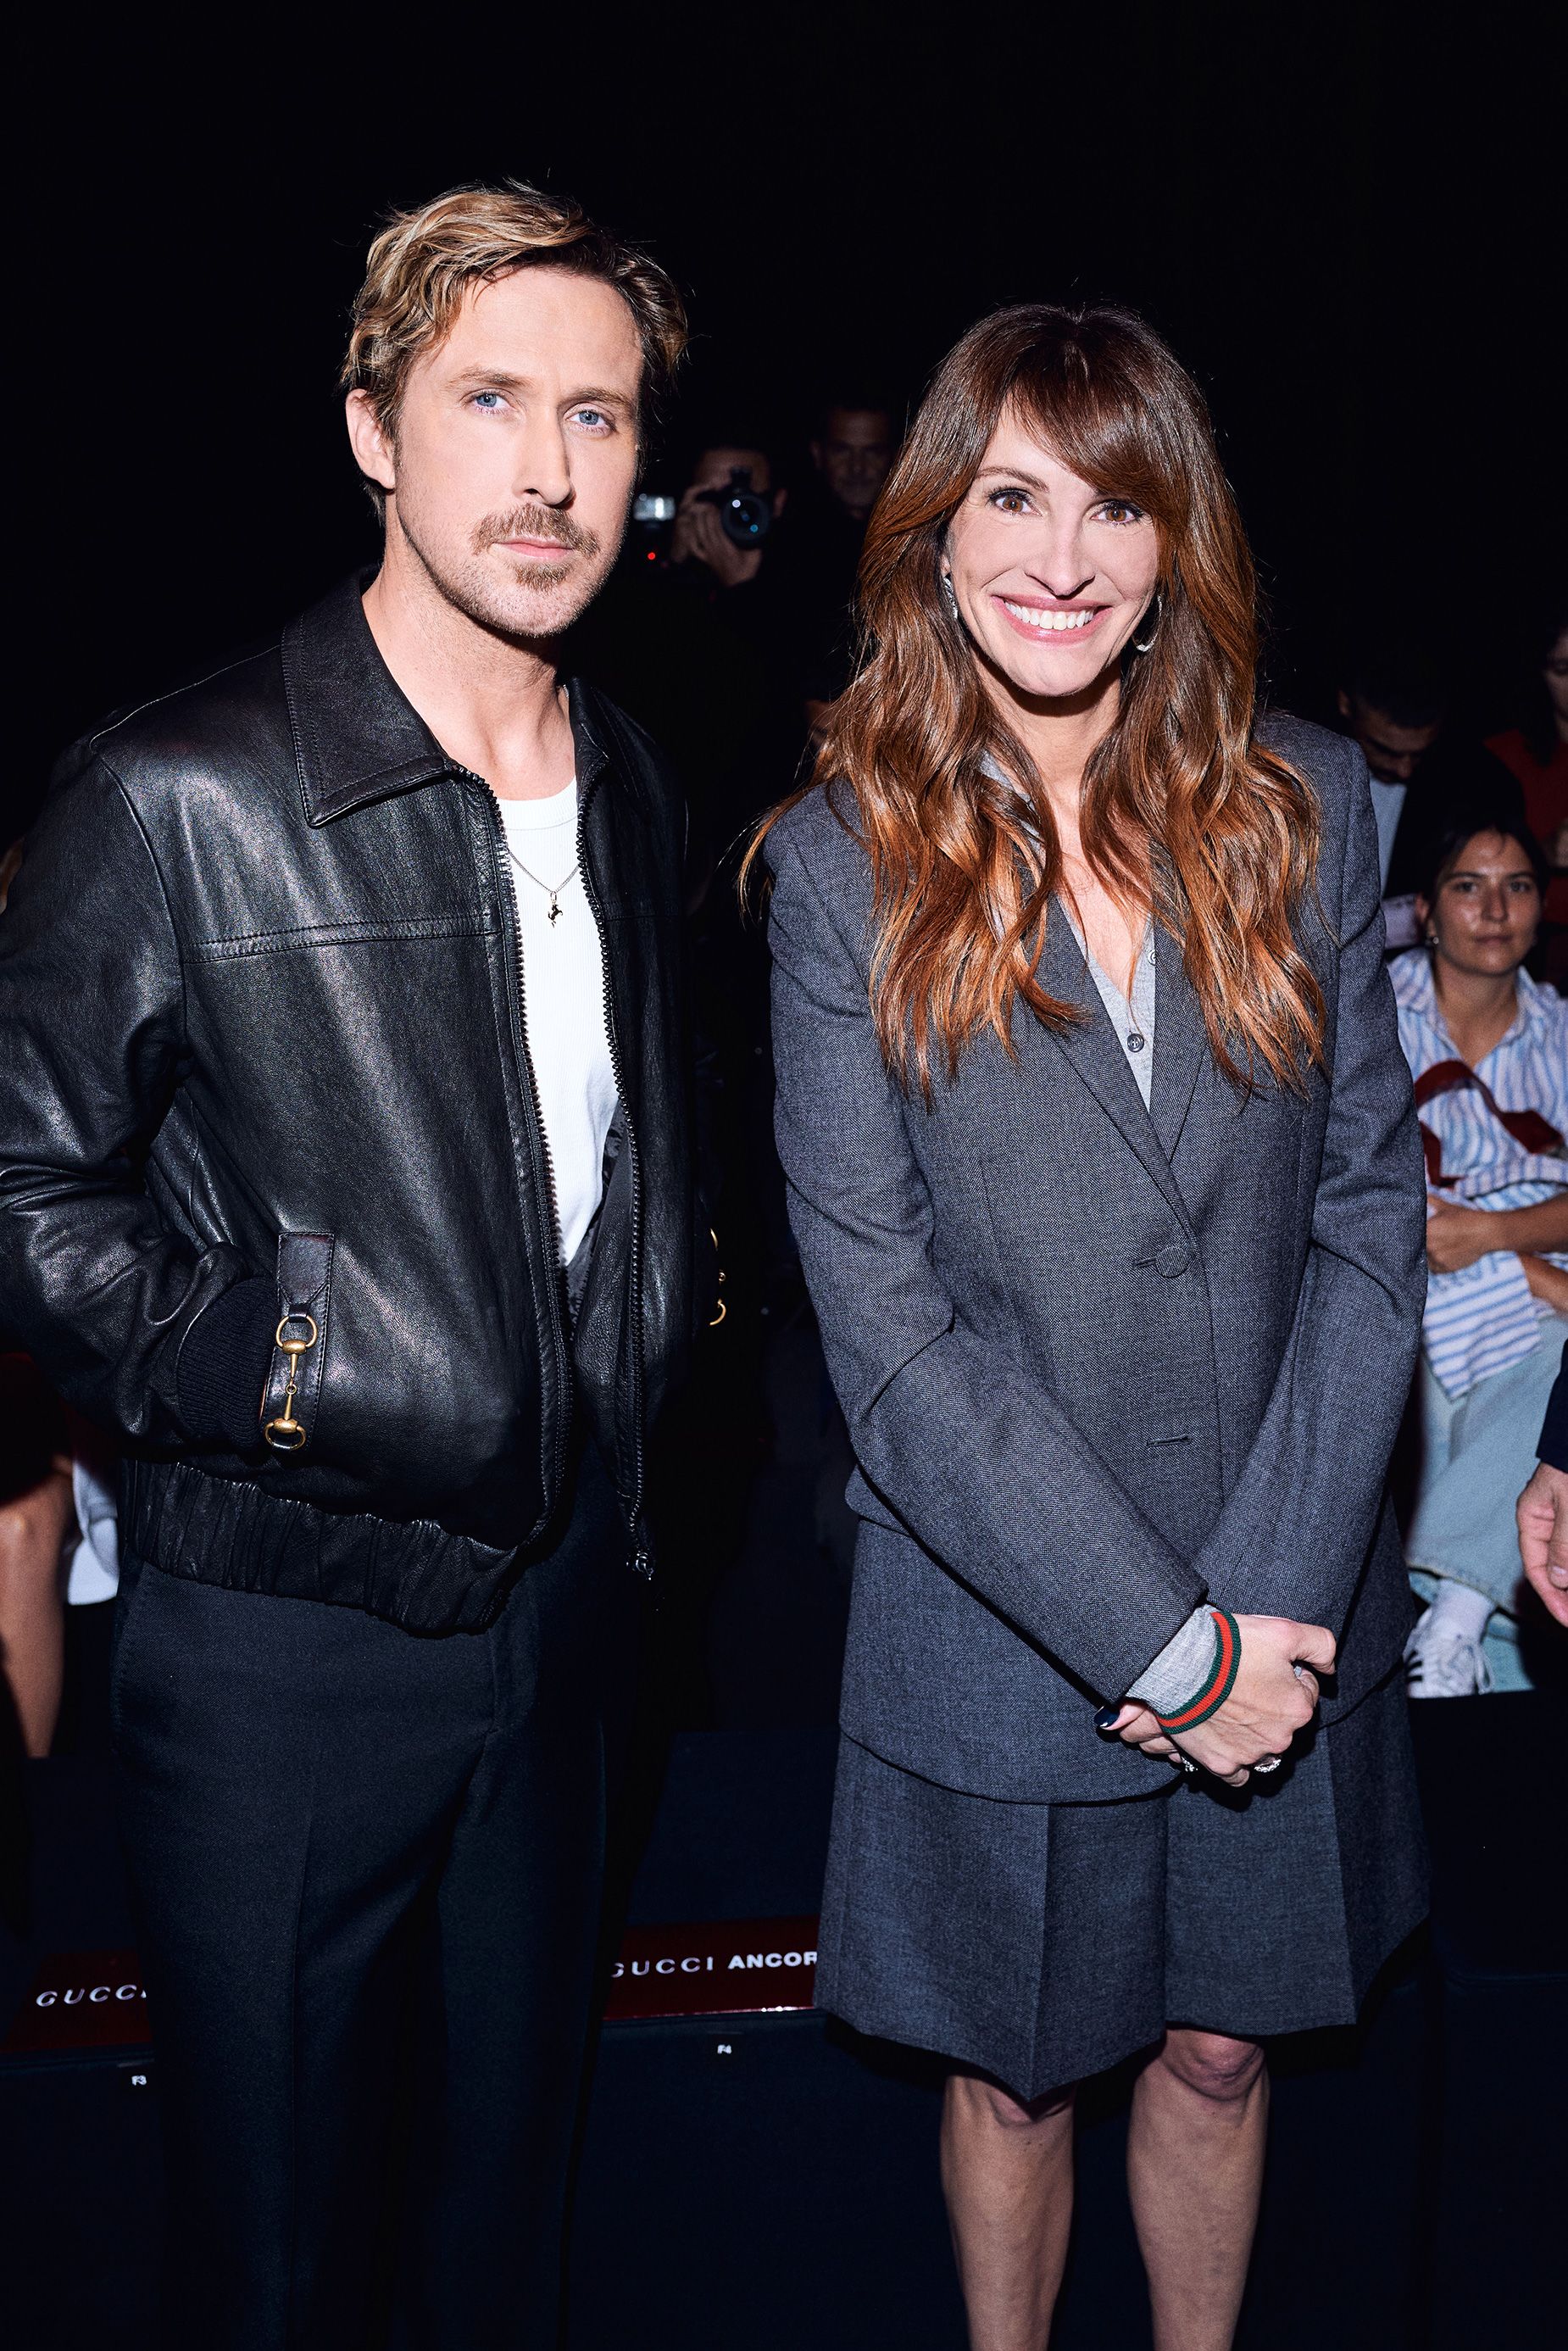 Ryan Gosling and Juila Roberts were among the star-studded crowd to pile into the Gucci show.